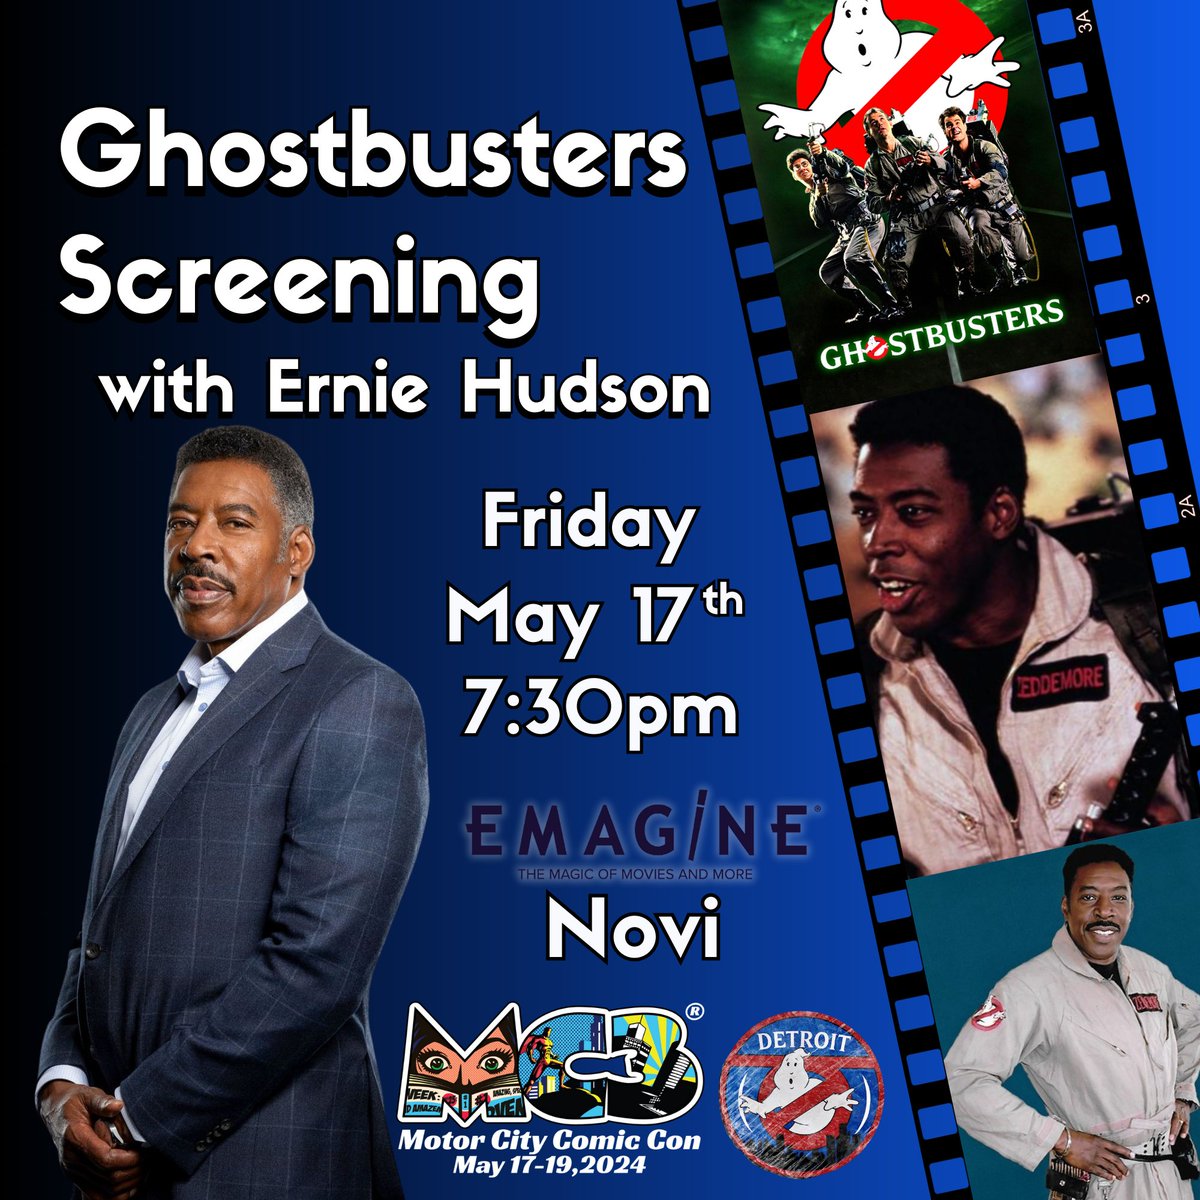 💥Join us on Friday May 17th for a Q&A with #ErnieHudson followed by a free screening of the original #Ghostbusters movie all at Emgine Theaters Novi. Your ticket to #MC3 will be required to attend along with #GhostbustersDetroit

🎫Tickets on sale at motorcitycomiccon.com